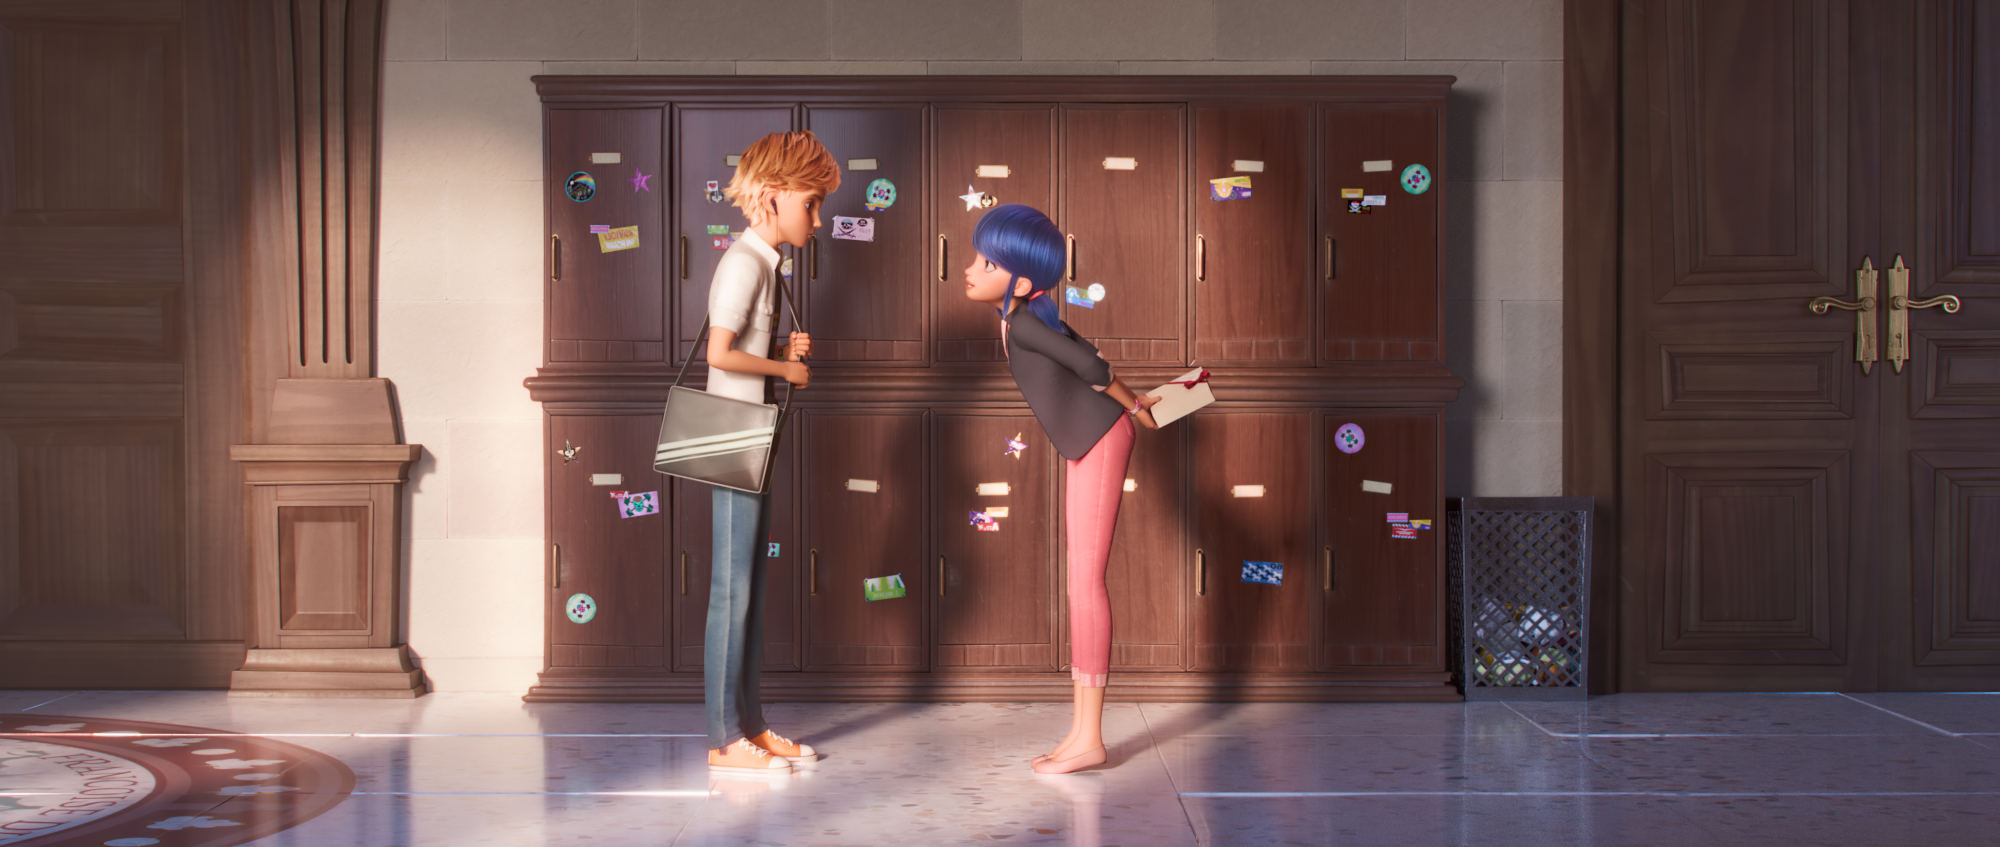 Miraculous: Ladybug & Cat Noir: The Movie' Coming to Netflix in July 2023 -  What's on Netflix